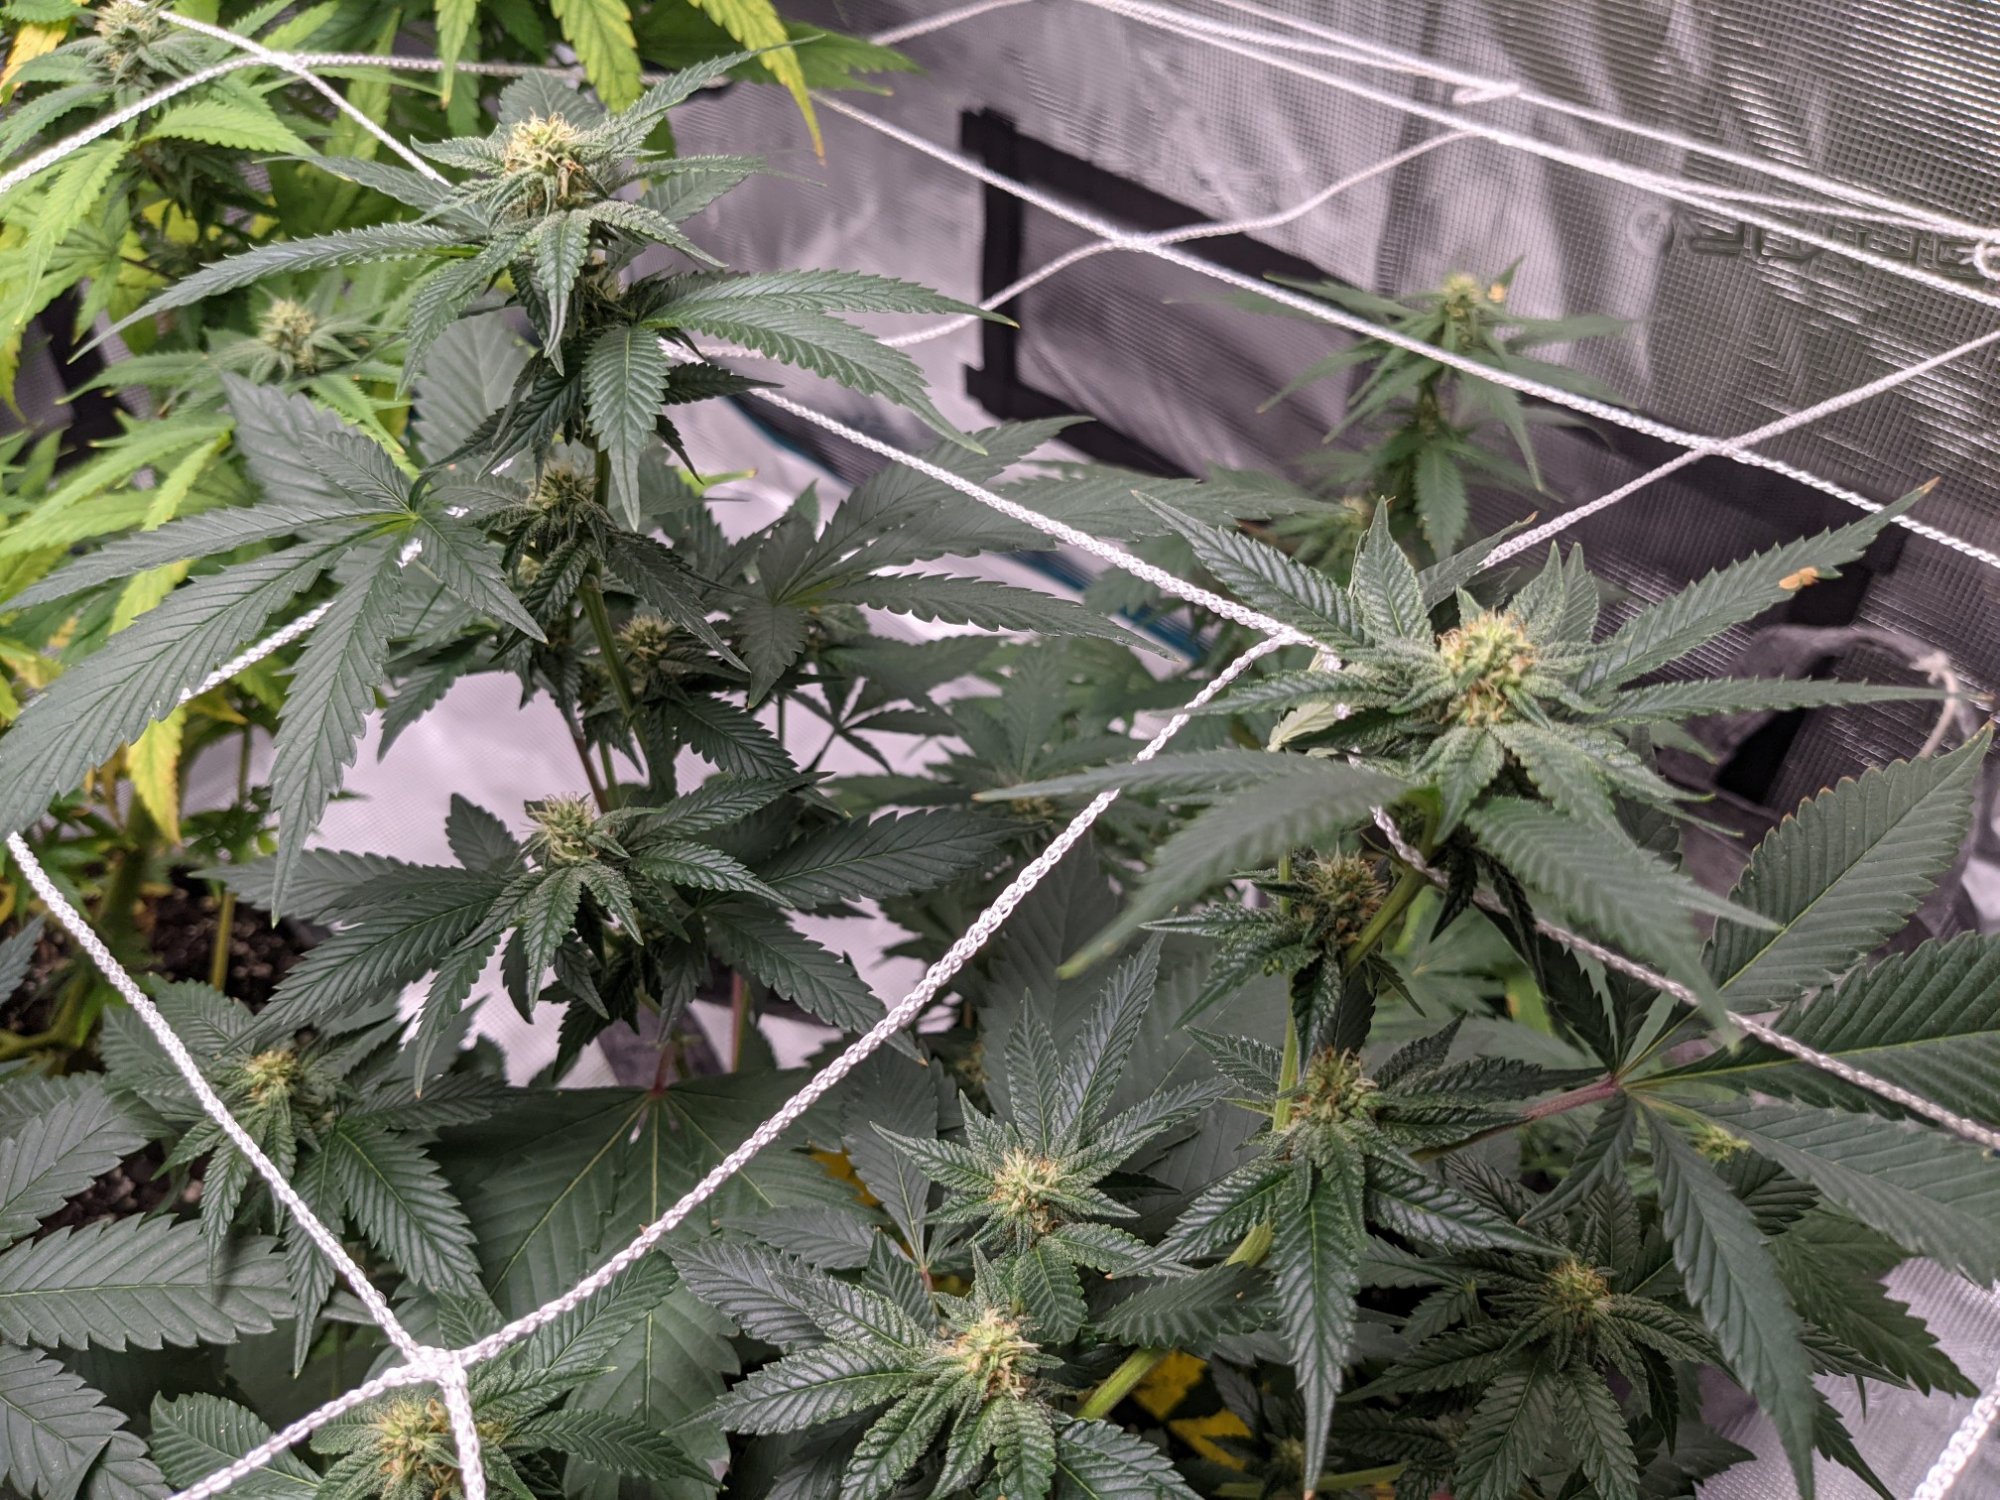 Whats going on with these plants 12